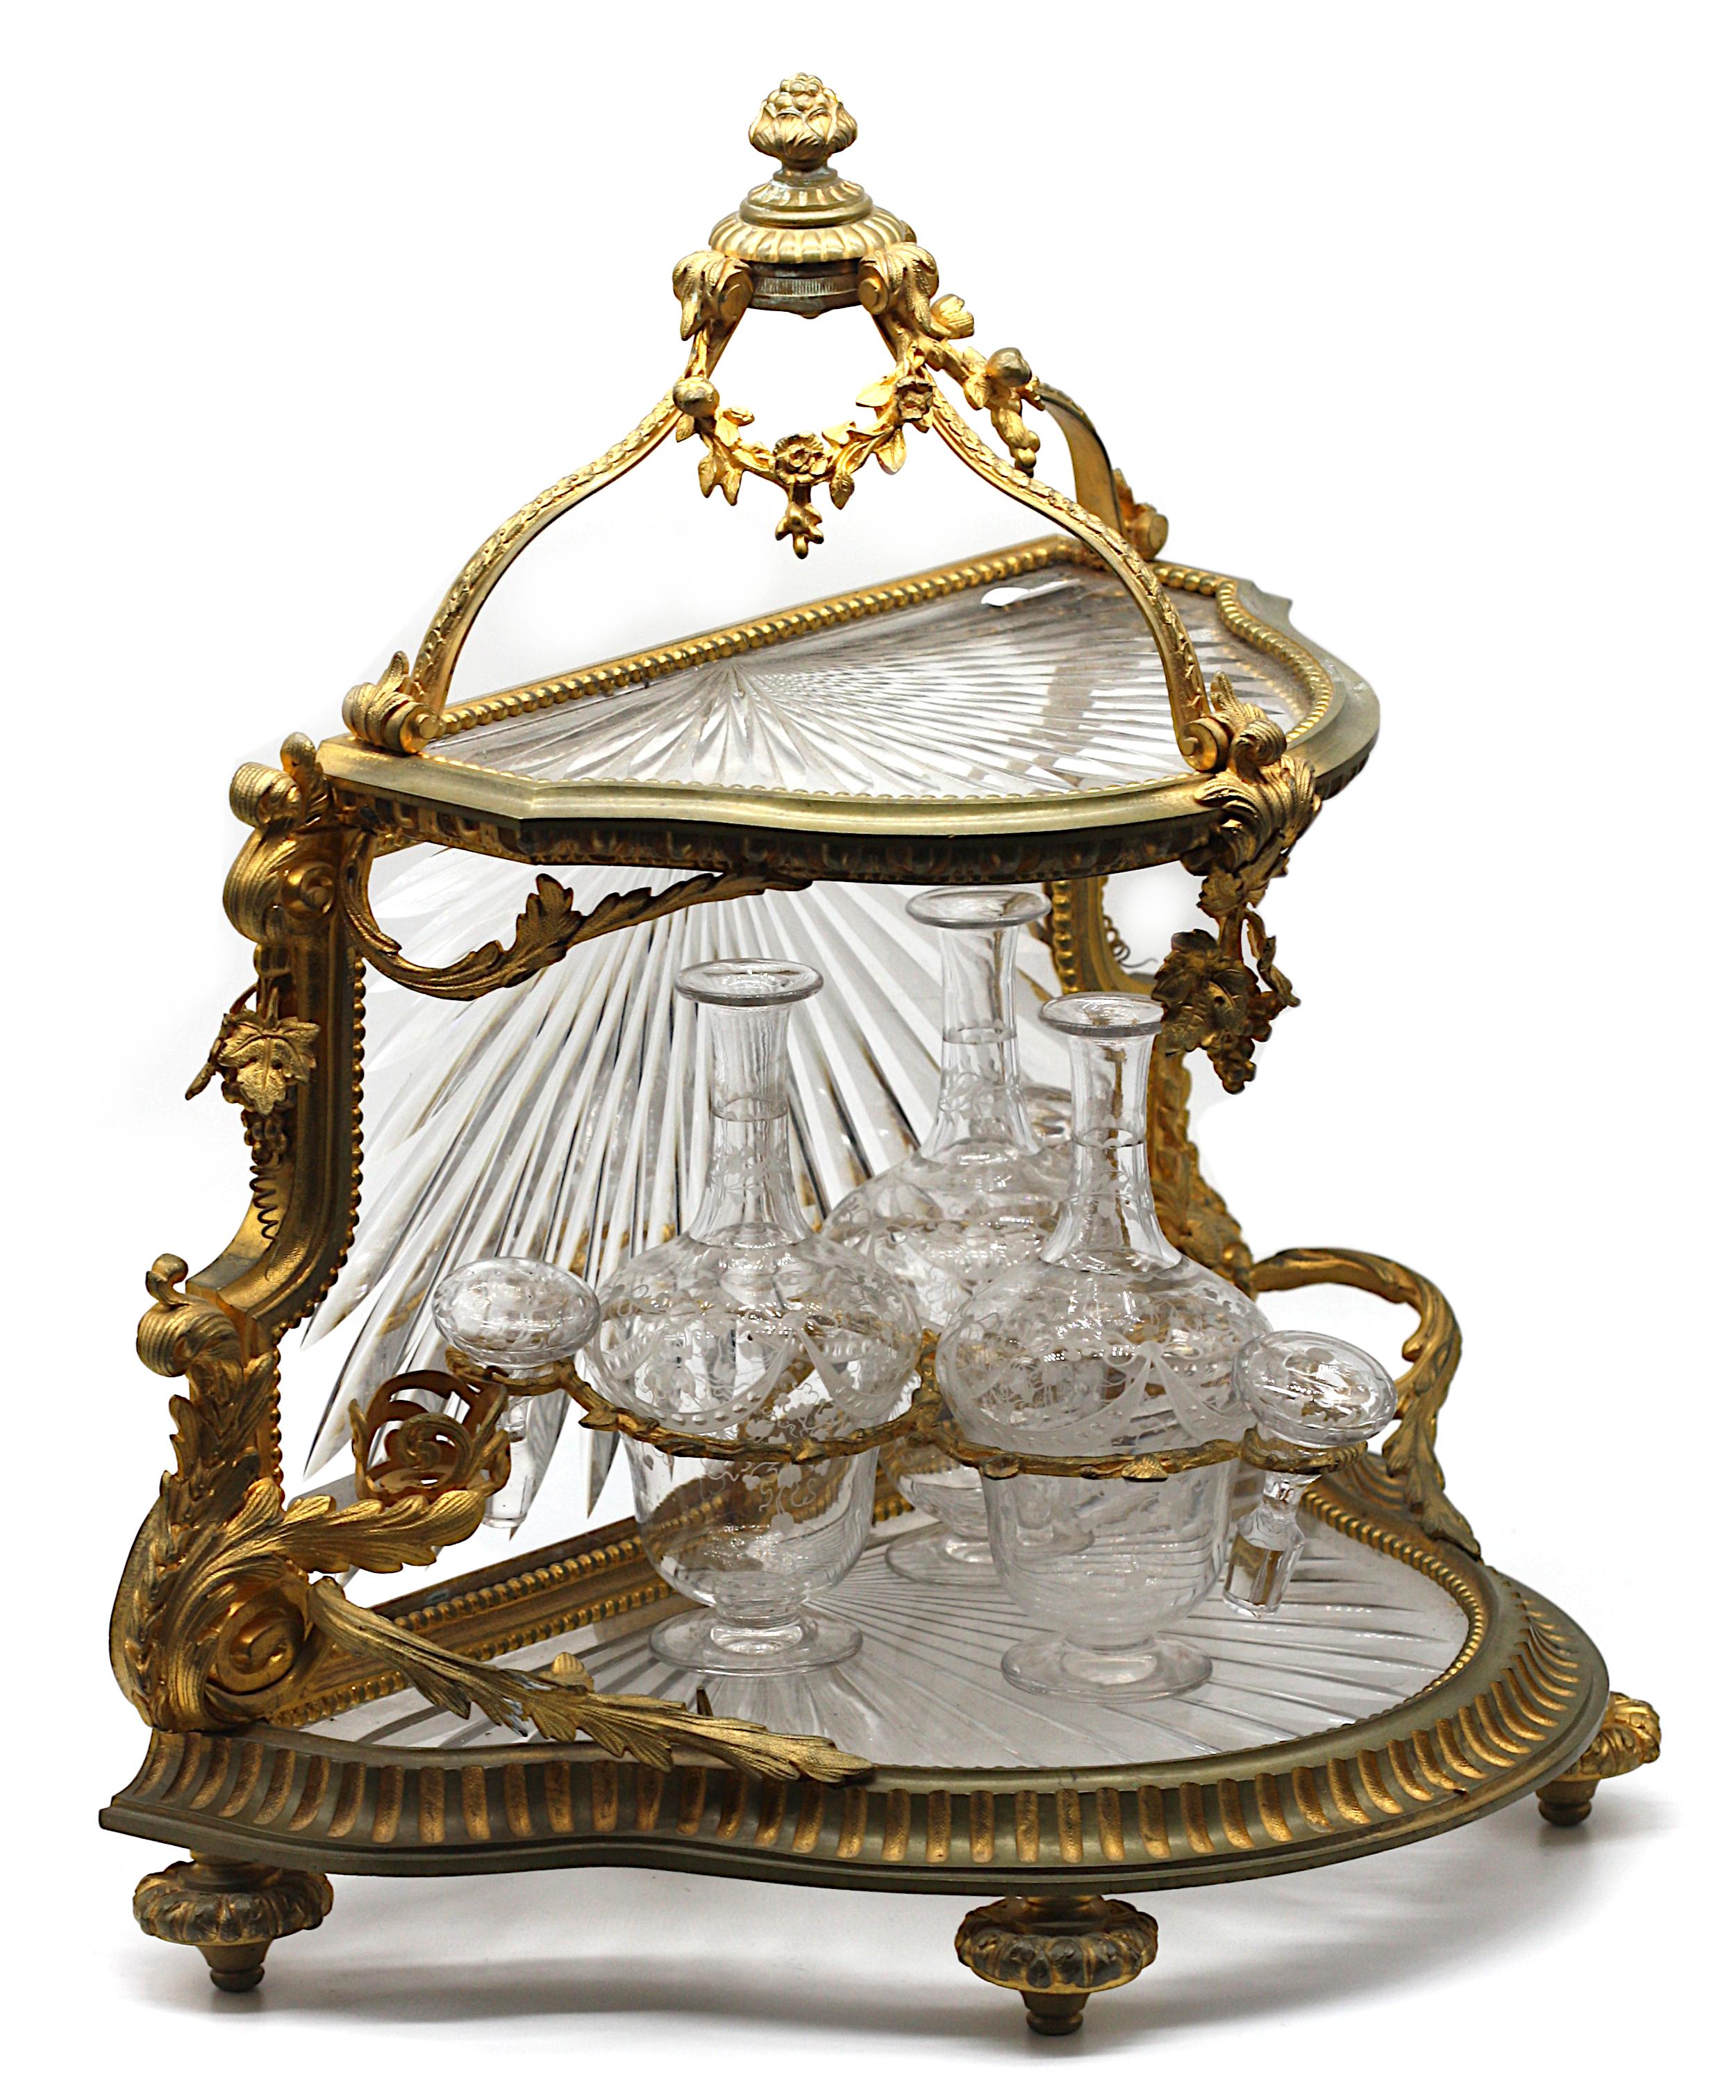 French Gilt Bronze and cut-Glass Tiered Liquor (Tantalus) Set
late 19th century, perhaps Baccarat
Of Demilune form, with an open crown, the hinged upper tier lifting up and set with a shelf cut with diagonal flutes, with a conformingly cut glass